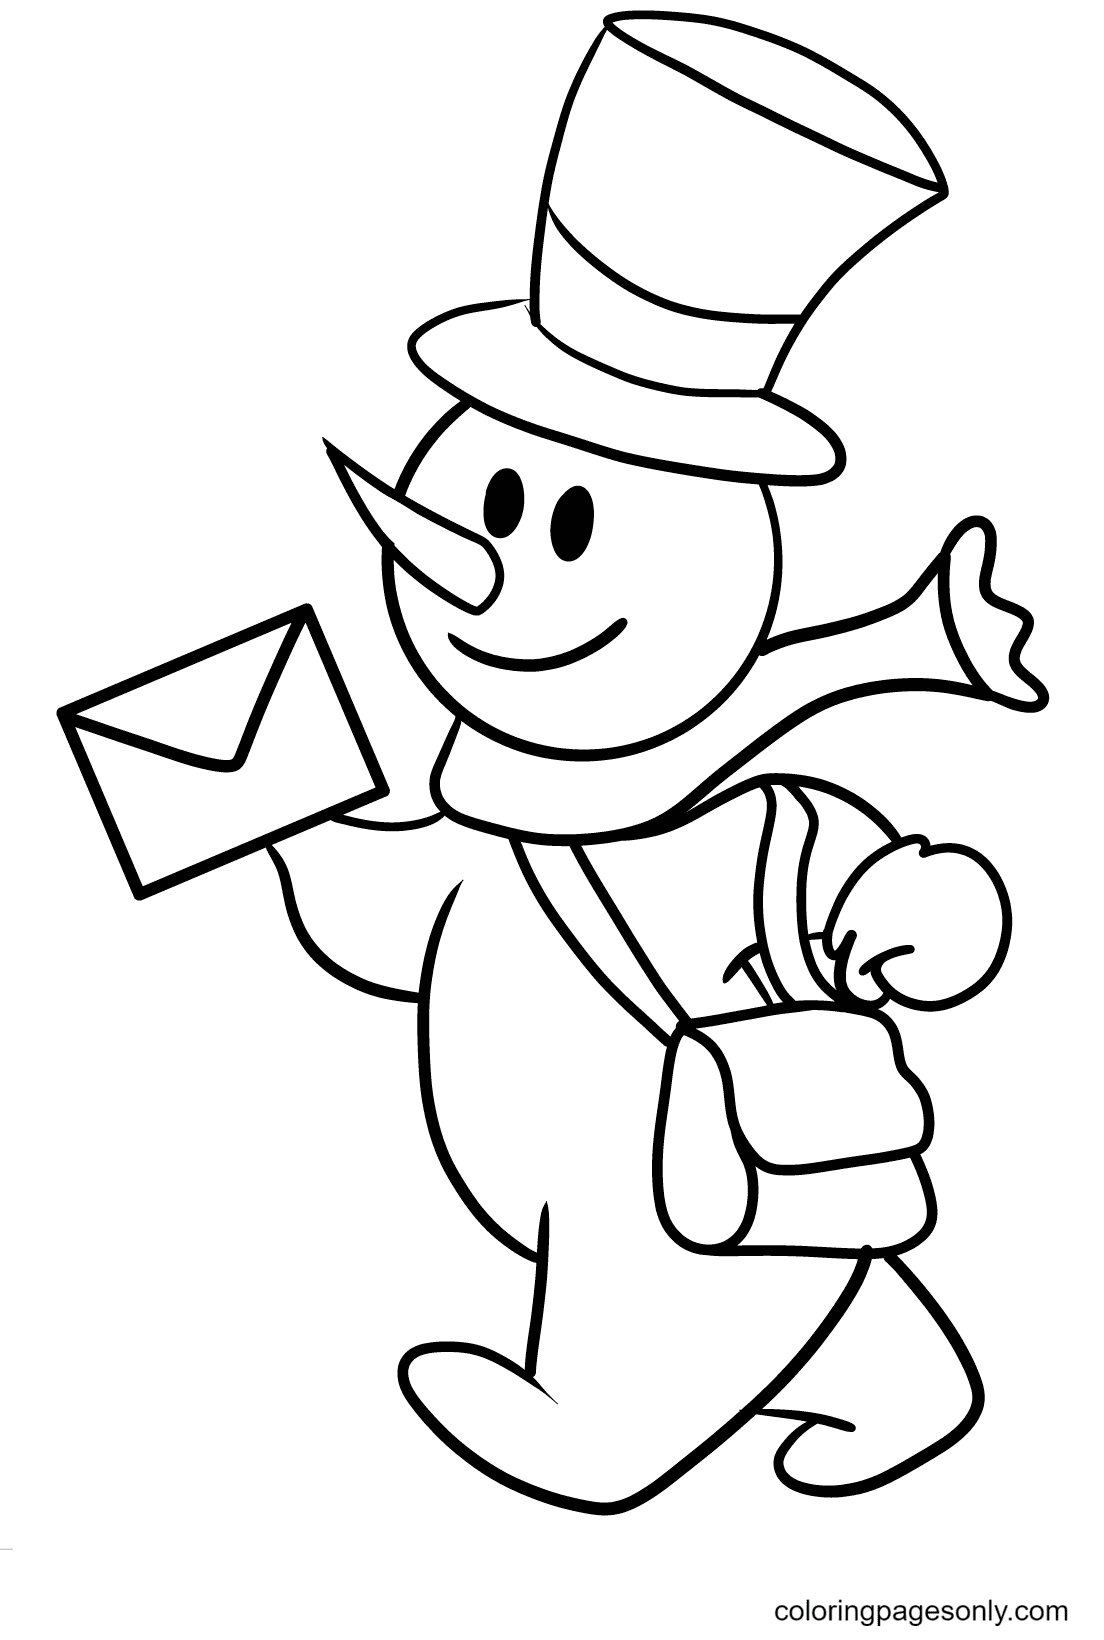 Post Office Snowman Coloring Pages